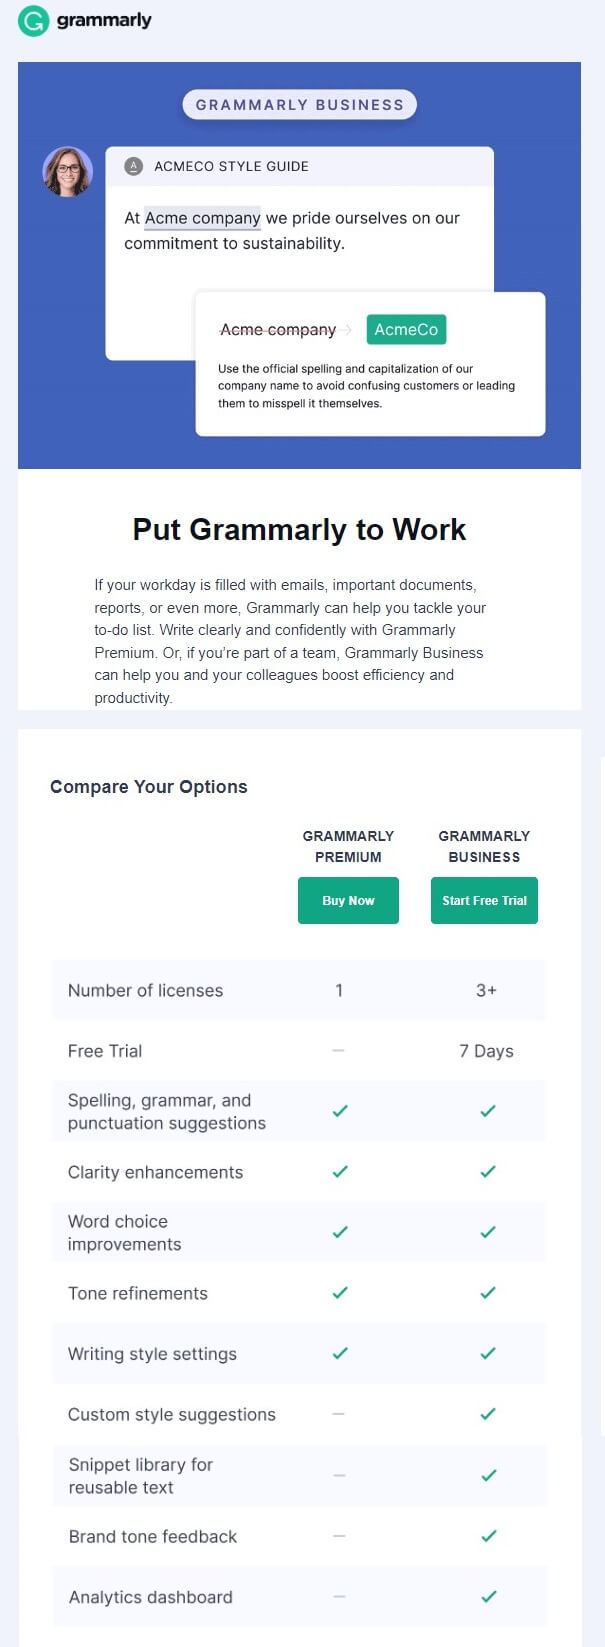 Promotional email from Grammarly